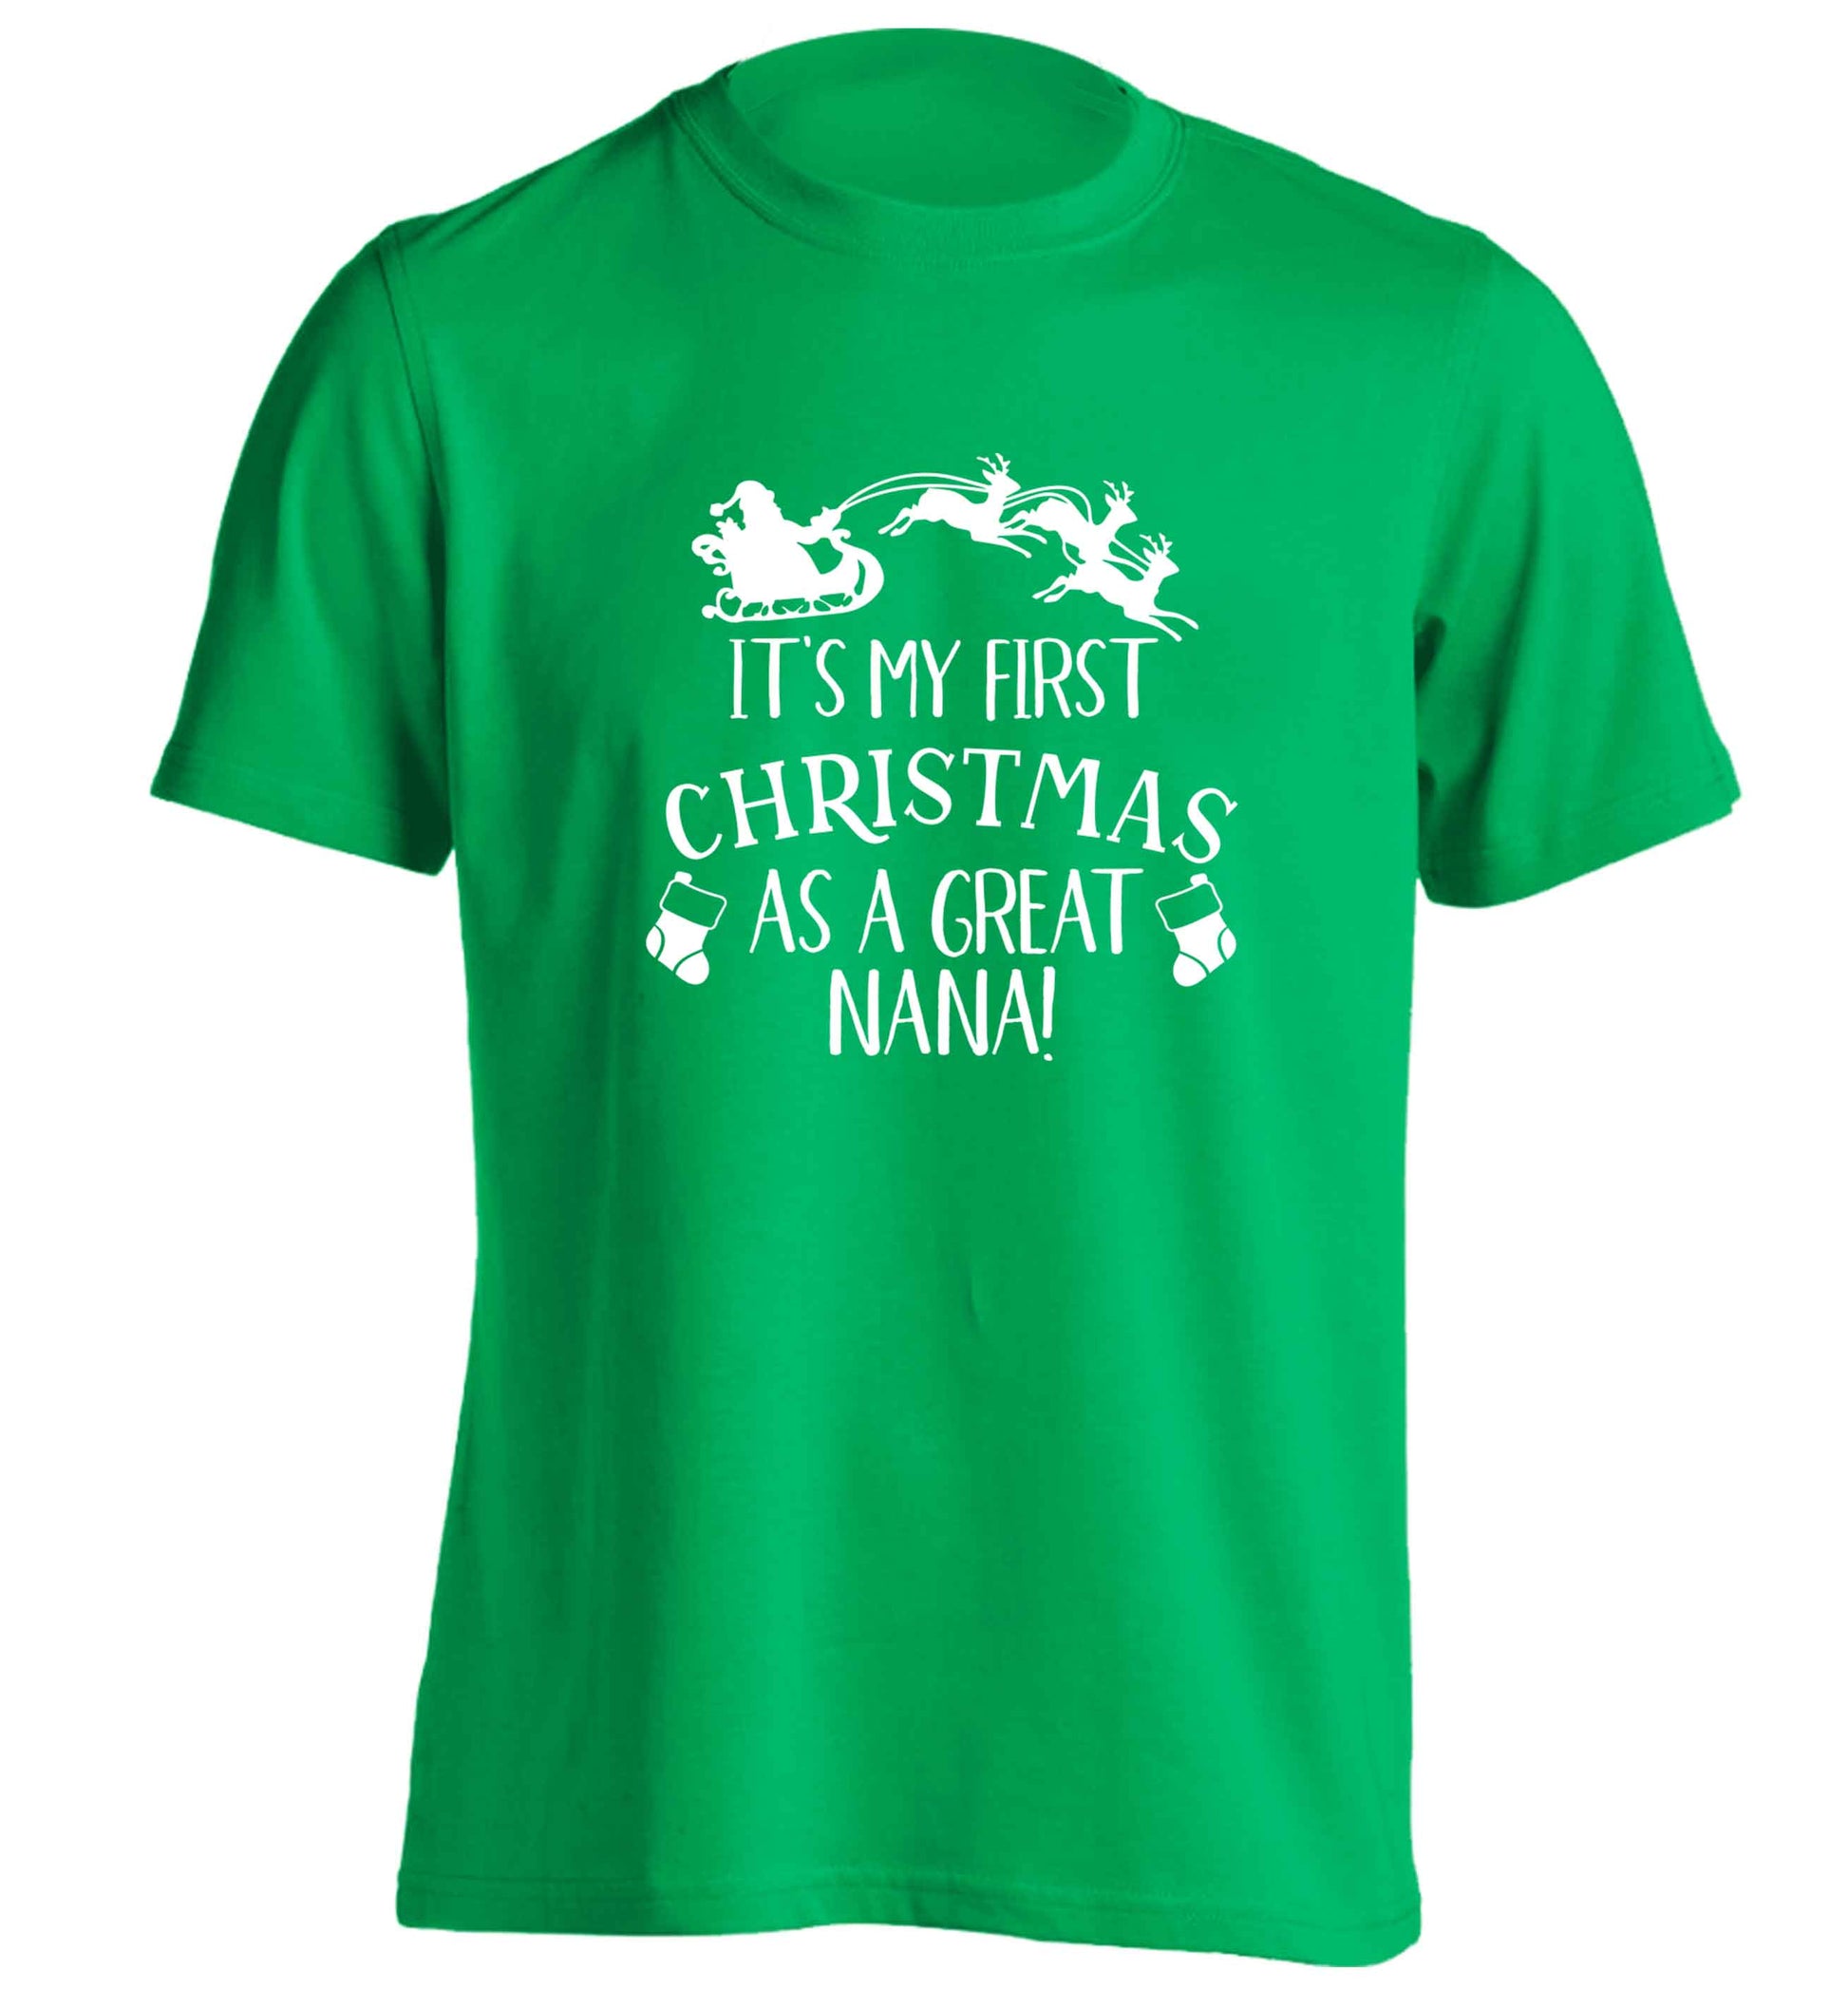 It's my first Christmas as a great nana! adults unisex green Tshirt 2XL